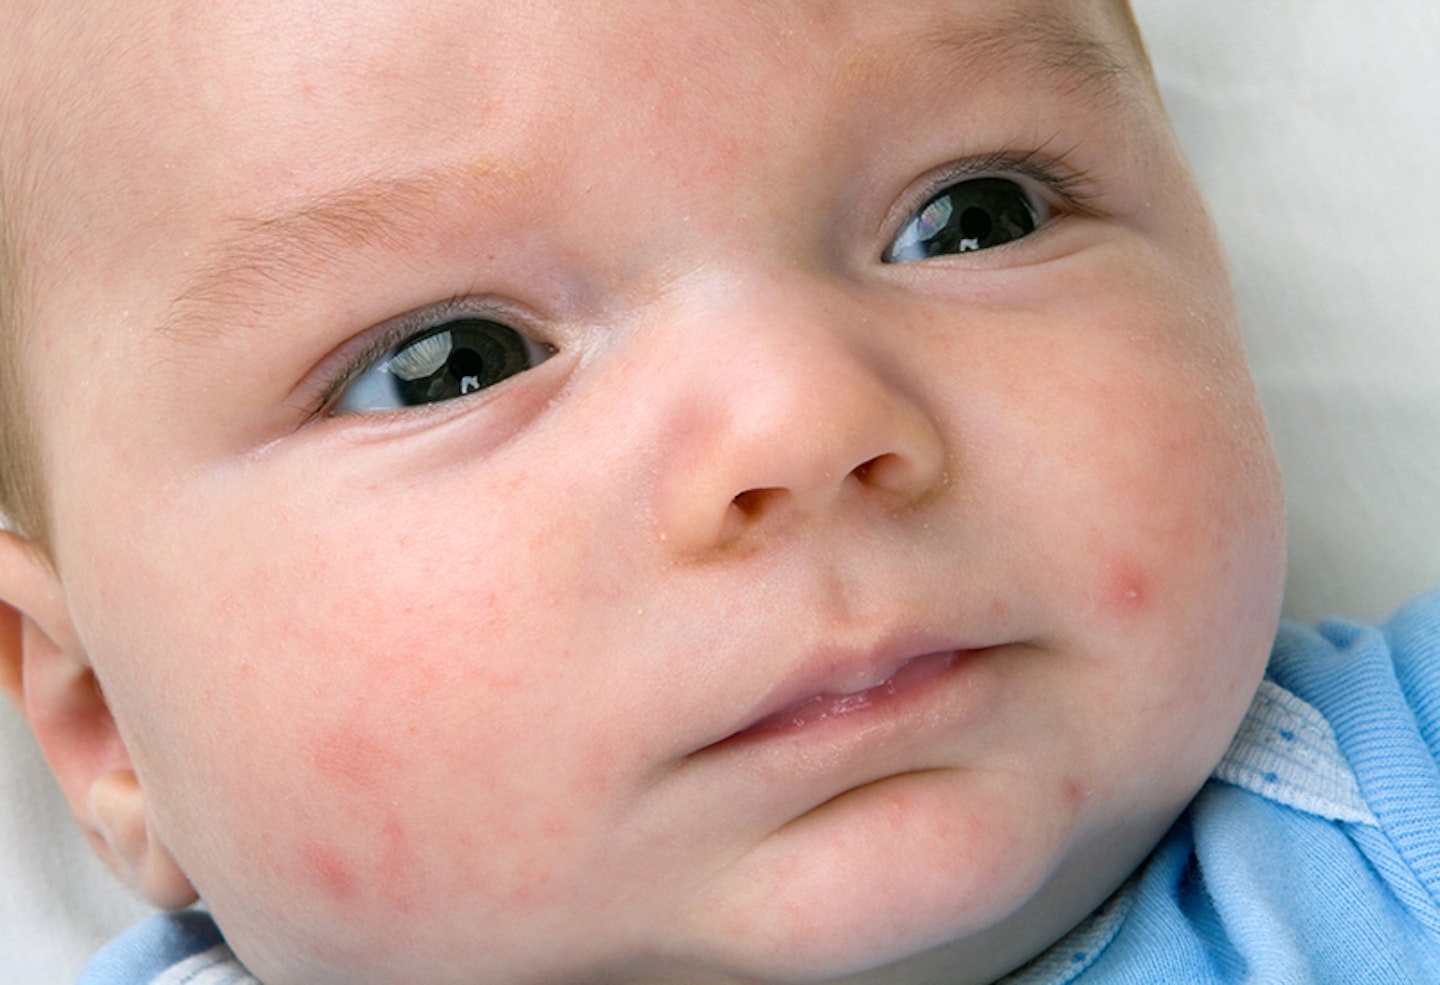 Chickenpox or heat rash? How to tell the difference between rashes